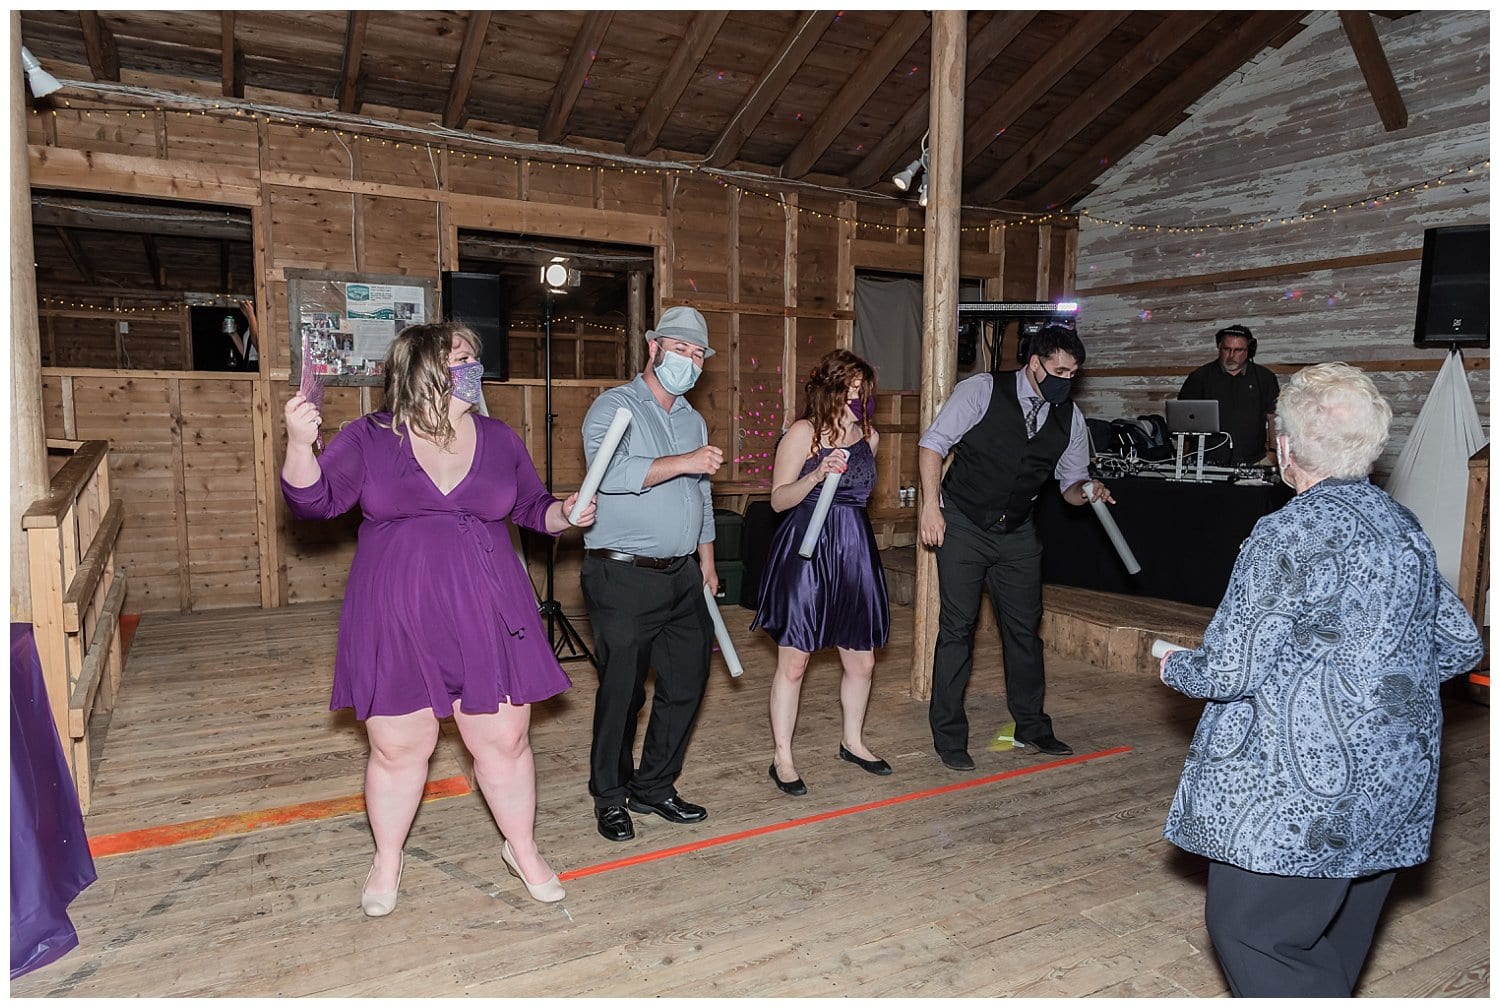 The DJ keeps the crowd dancing during a wedding reception at the Hubbard's Barn in NS.